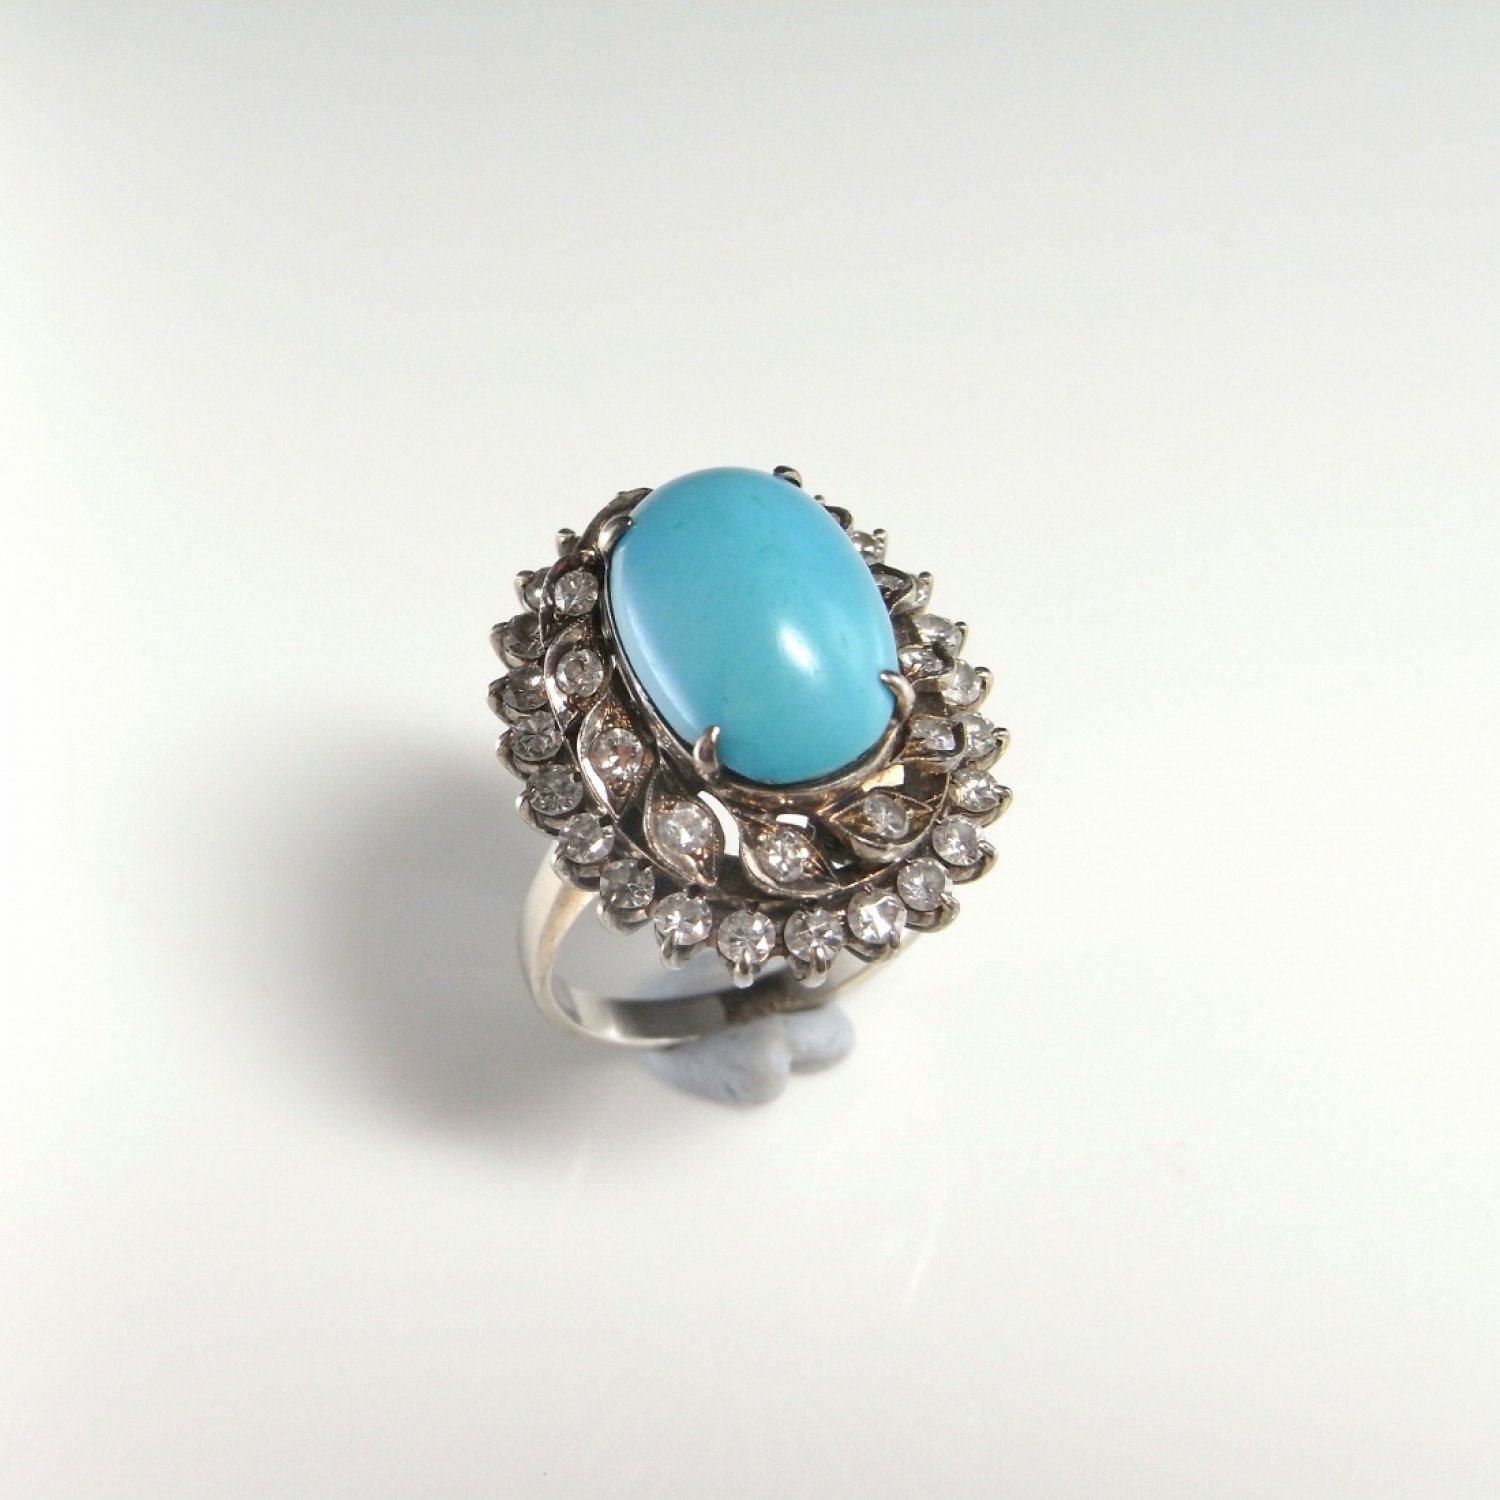 Turquoise Diamond Ring 18K Gold Ring Art Deco Diamond Ring Bombe Dome Cluster Ballerina Turquoise Cabochon Handmade Heirloom Jewelry 1920s 1930s 1940s Ring Exceptional Natural Turquoise Luxury High End